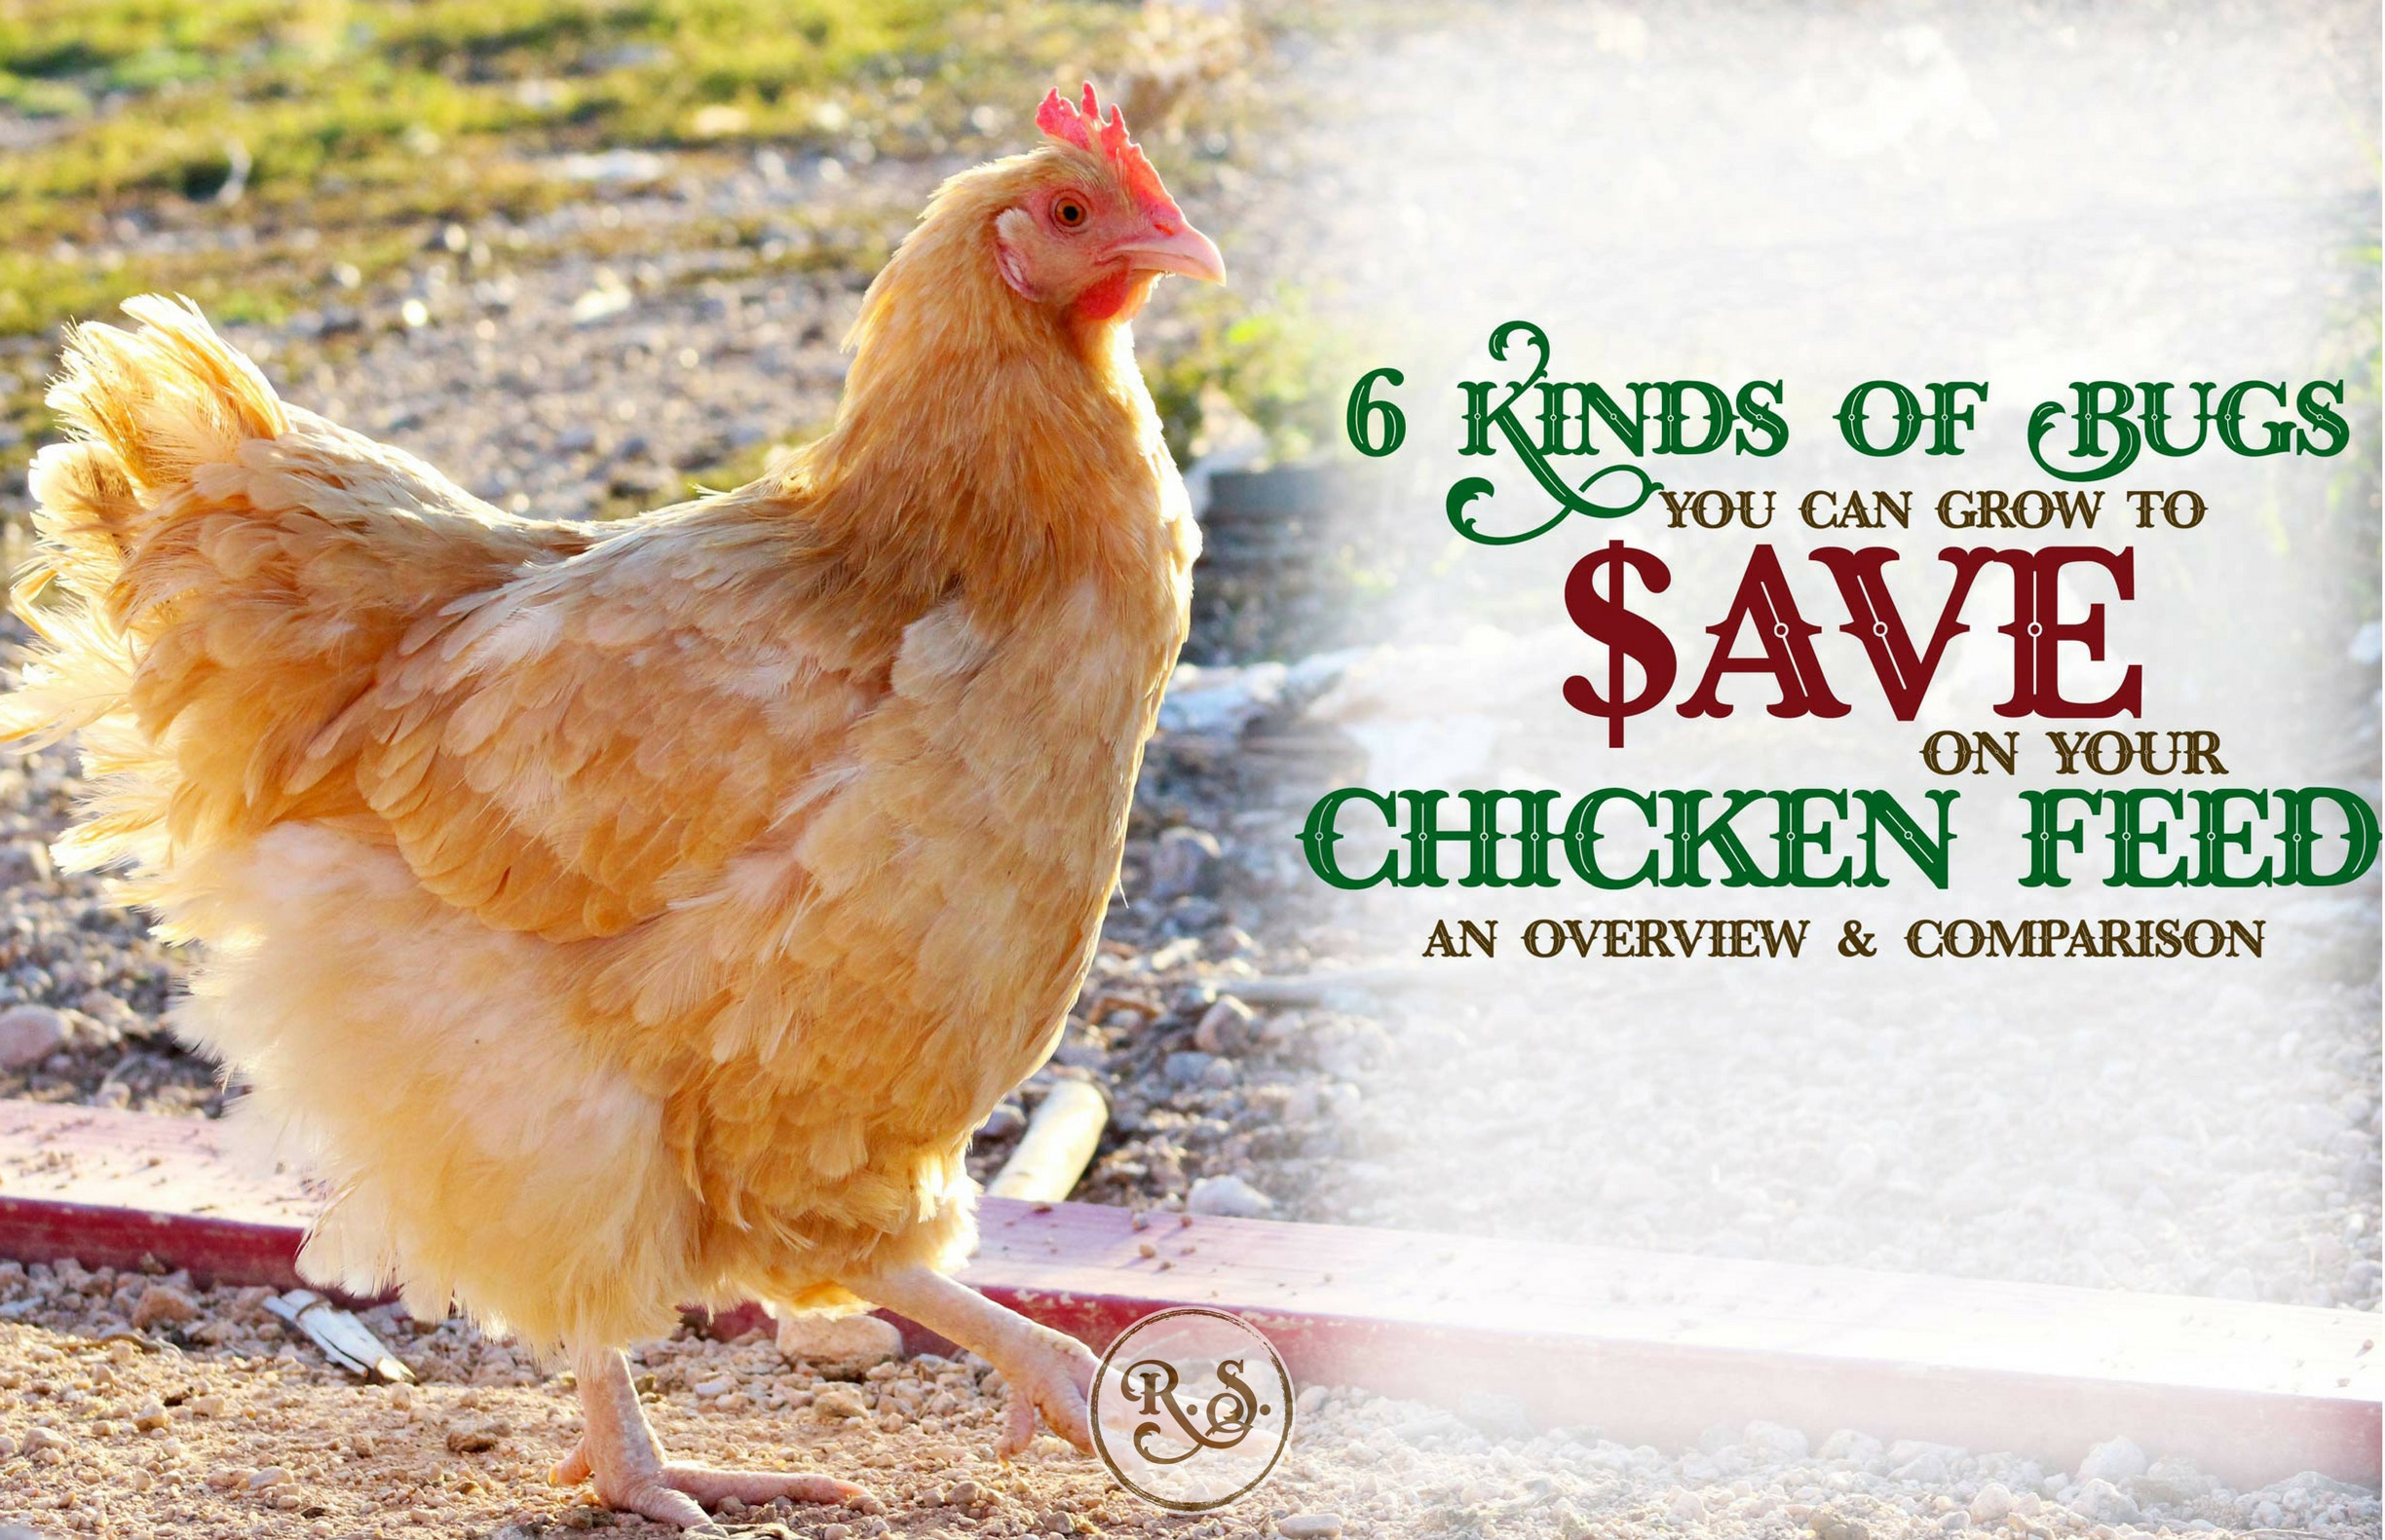 Cut your chicken feed bill by growing bugs. Here’s an overview to help you decide which bugs are best for your chickens. Be more self-sufficient by raising your own chicken food.